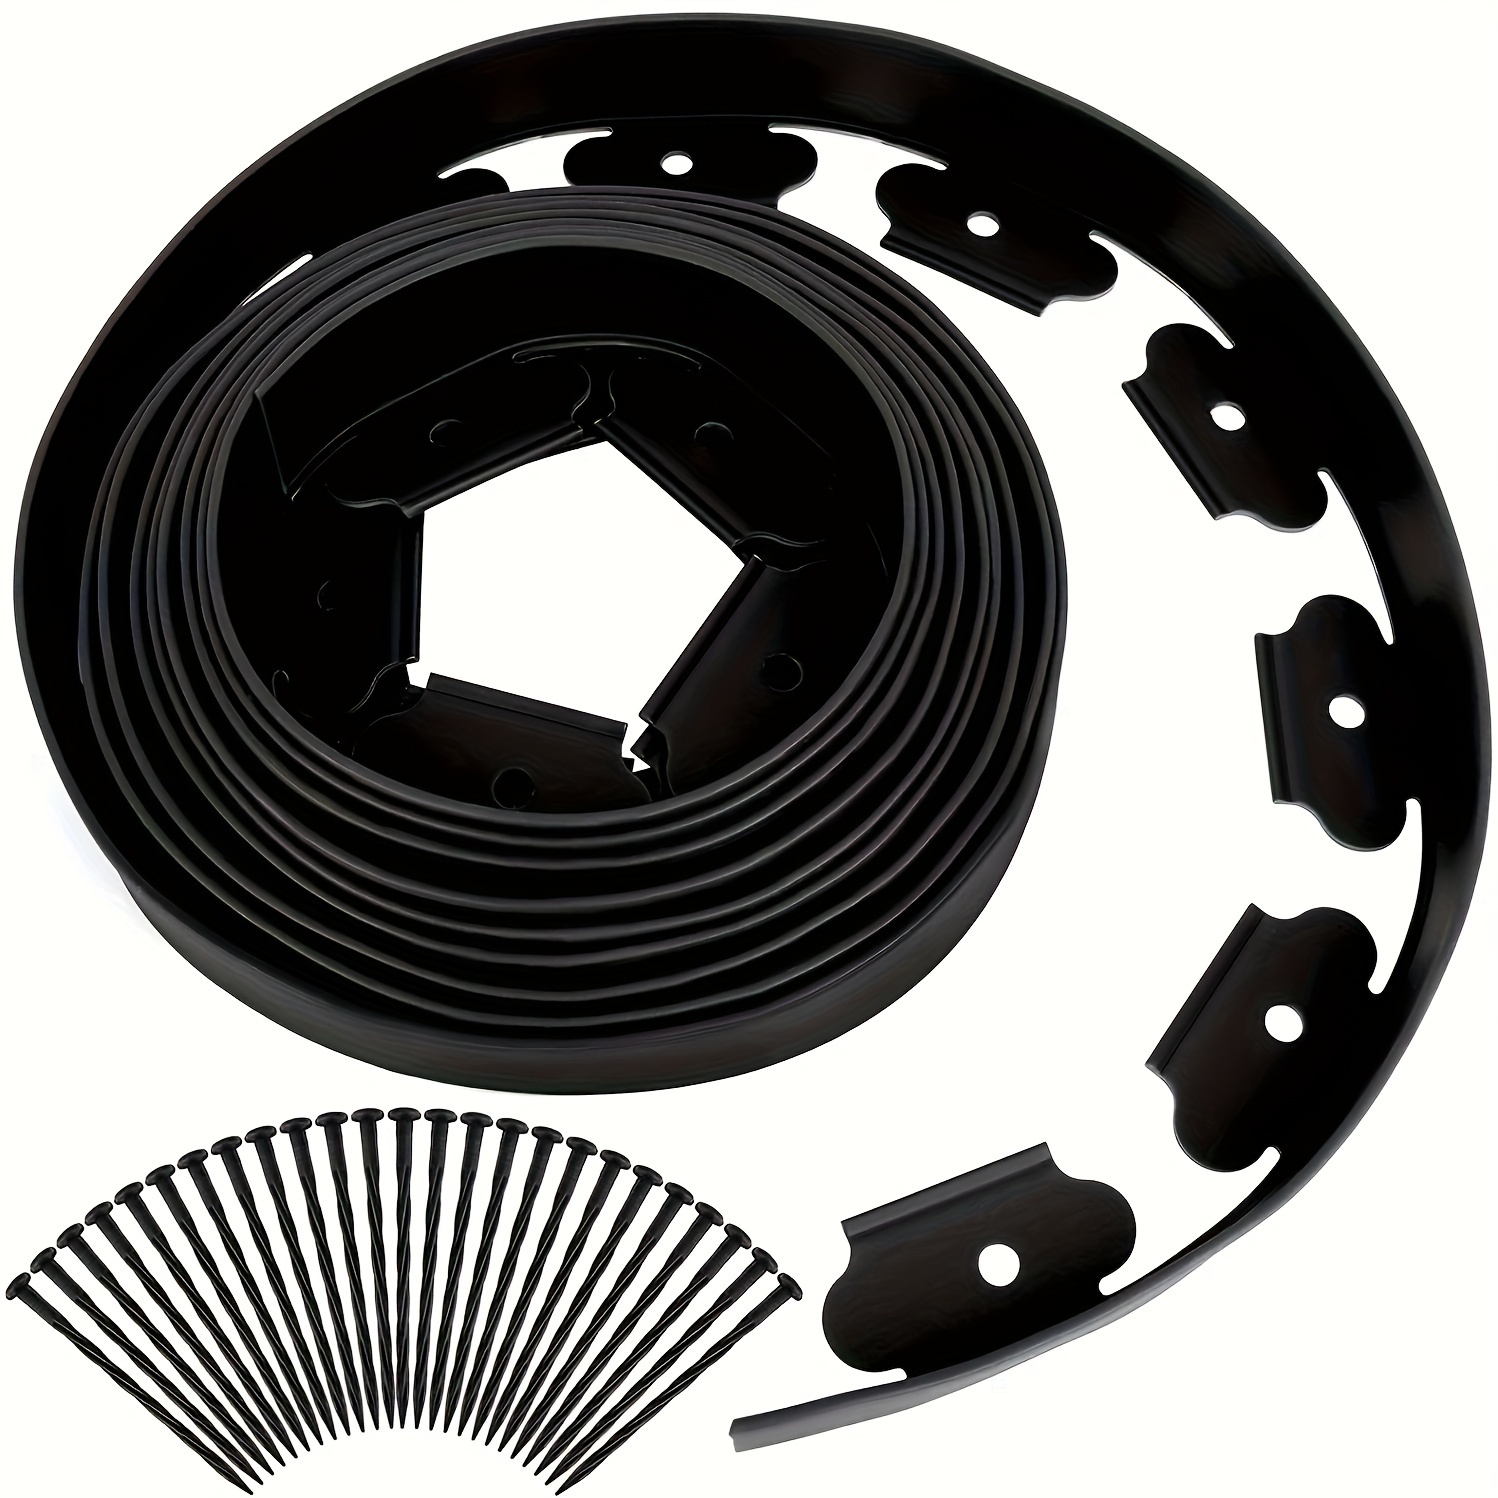 

Easy-install Black Plastic Garden Edging Kit, 196.85" Lawn Barrier With 30 Anchor Pegs - Durable Landscape Border For Home & Office